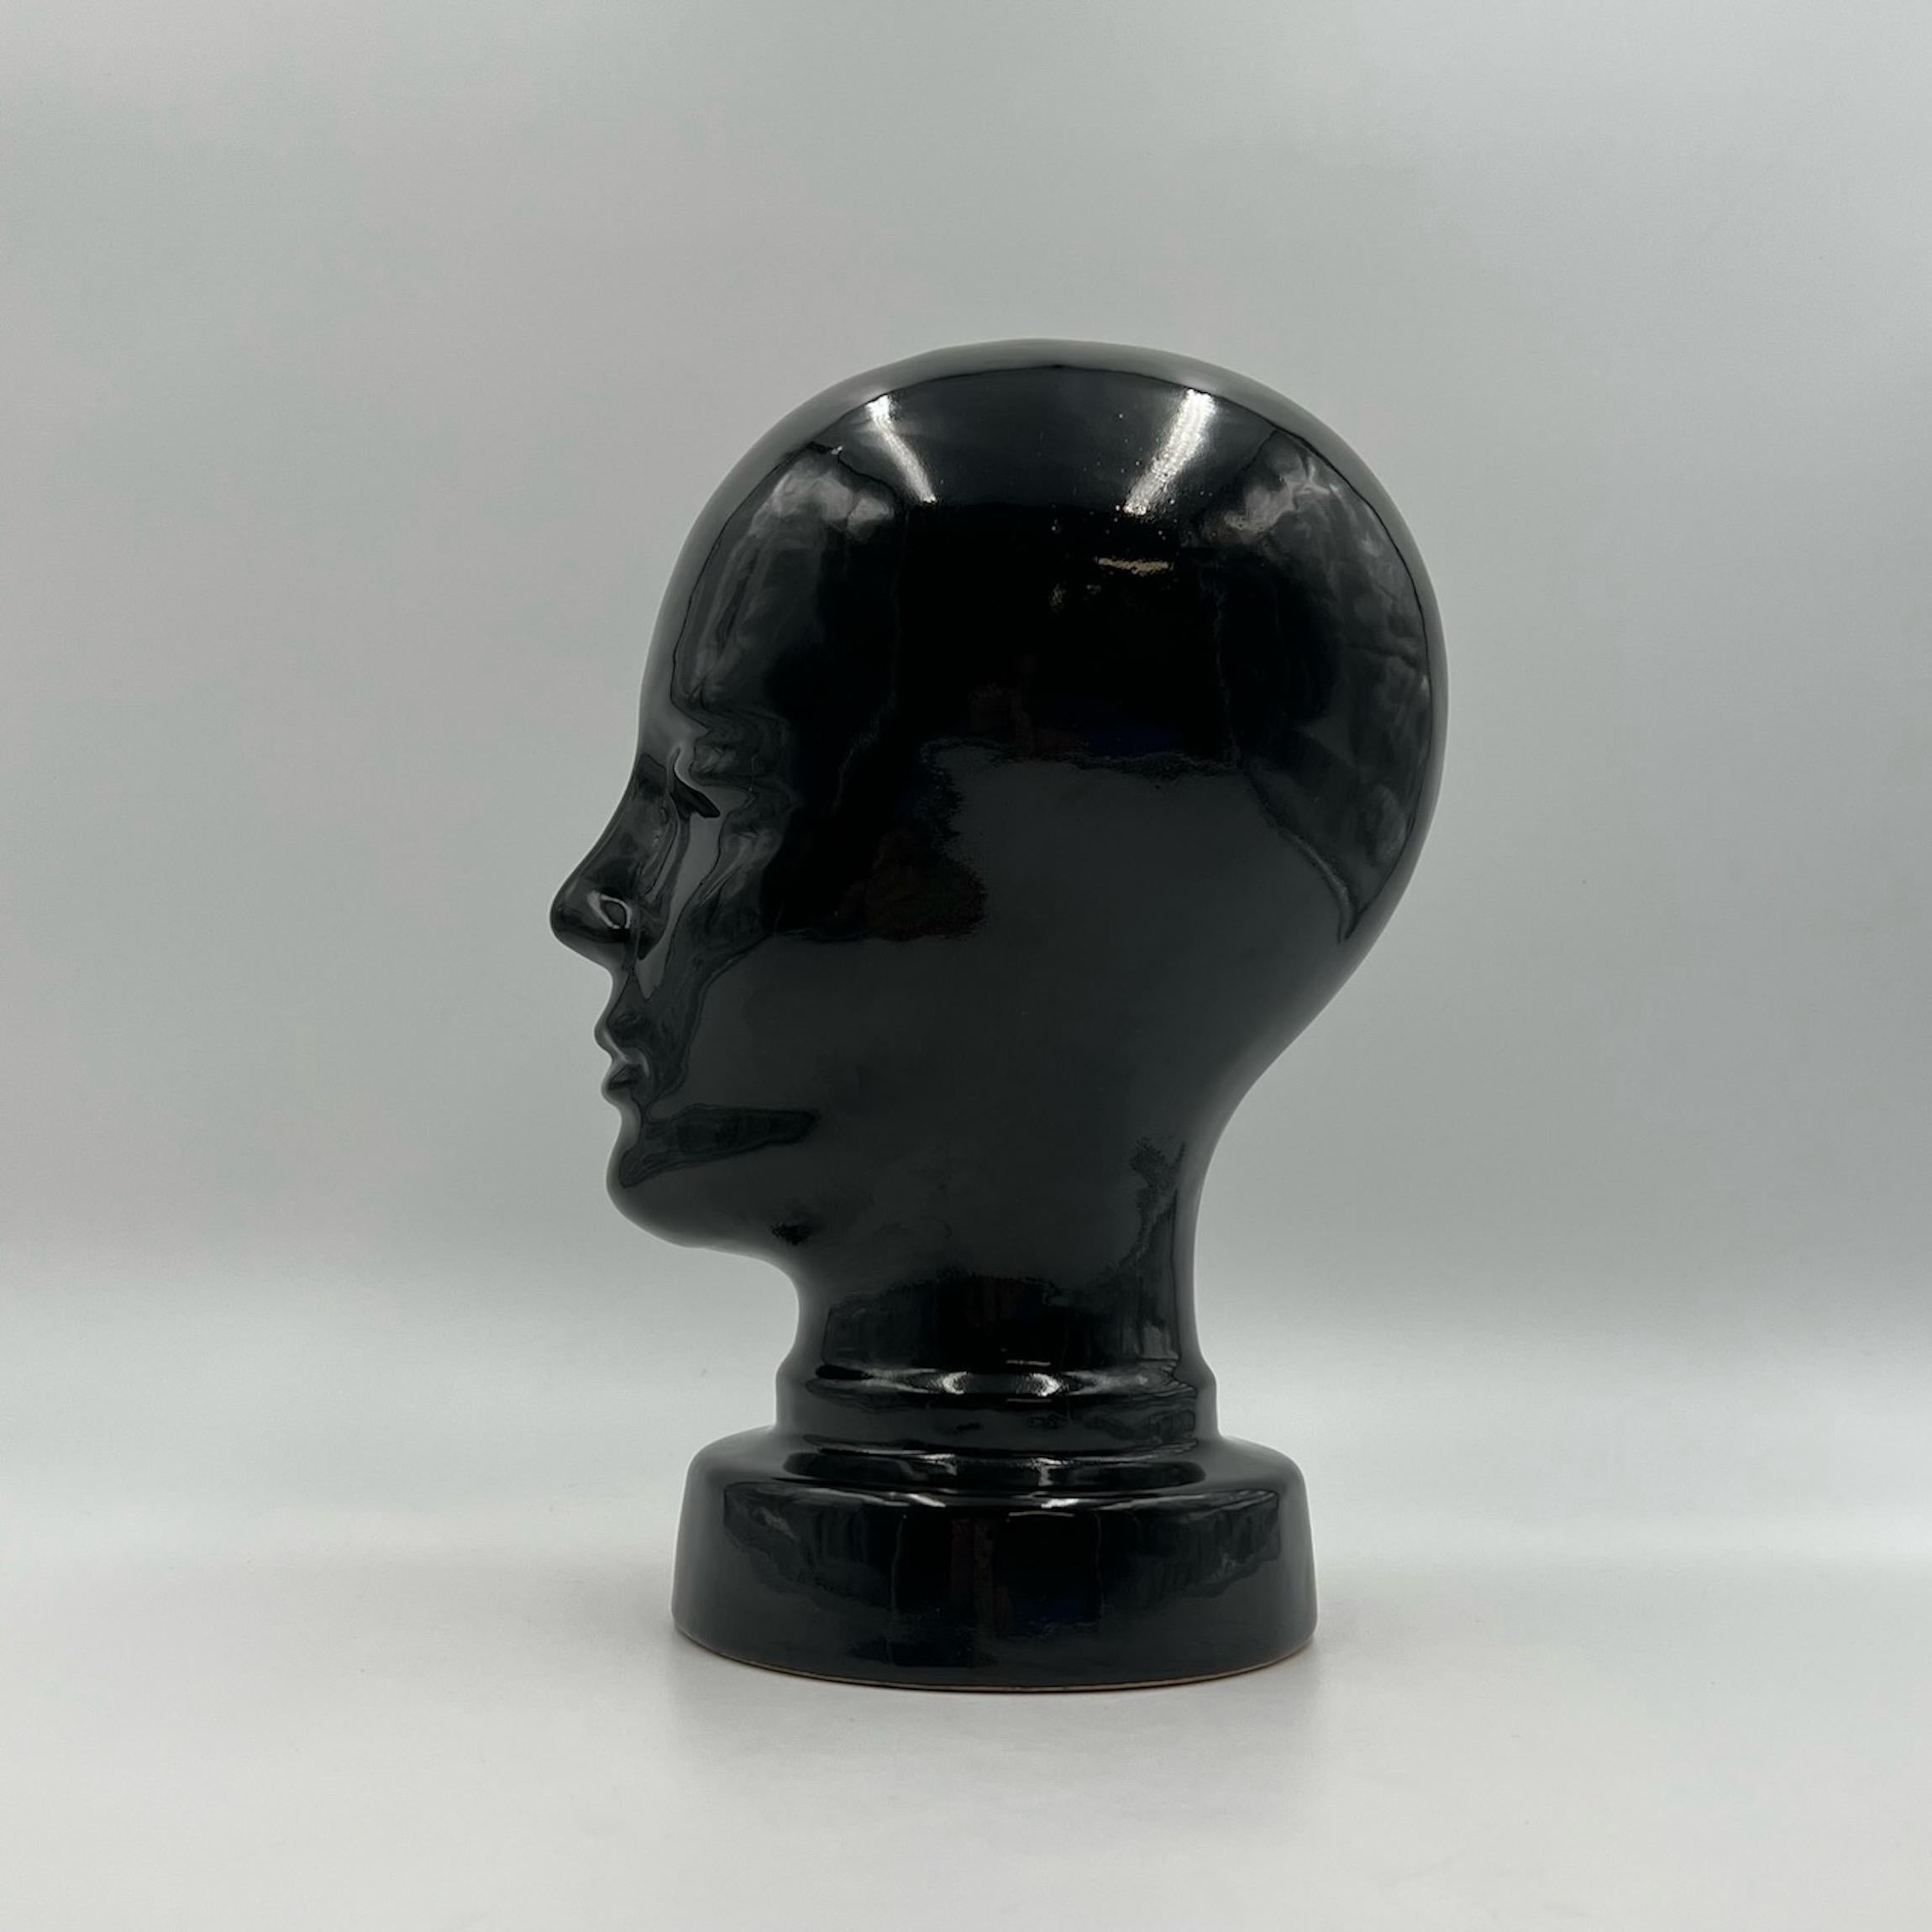 Rare vintage ceramic head, produced in West Germany in the 70s, made of glossy black glazed ceramic. A great piece of craftsmanship, with delicate and and realistic details, that will give a distinctive touch to any room.  

In excellent condition,